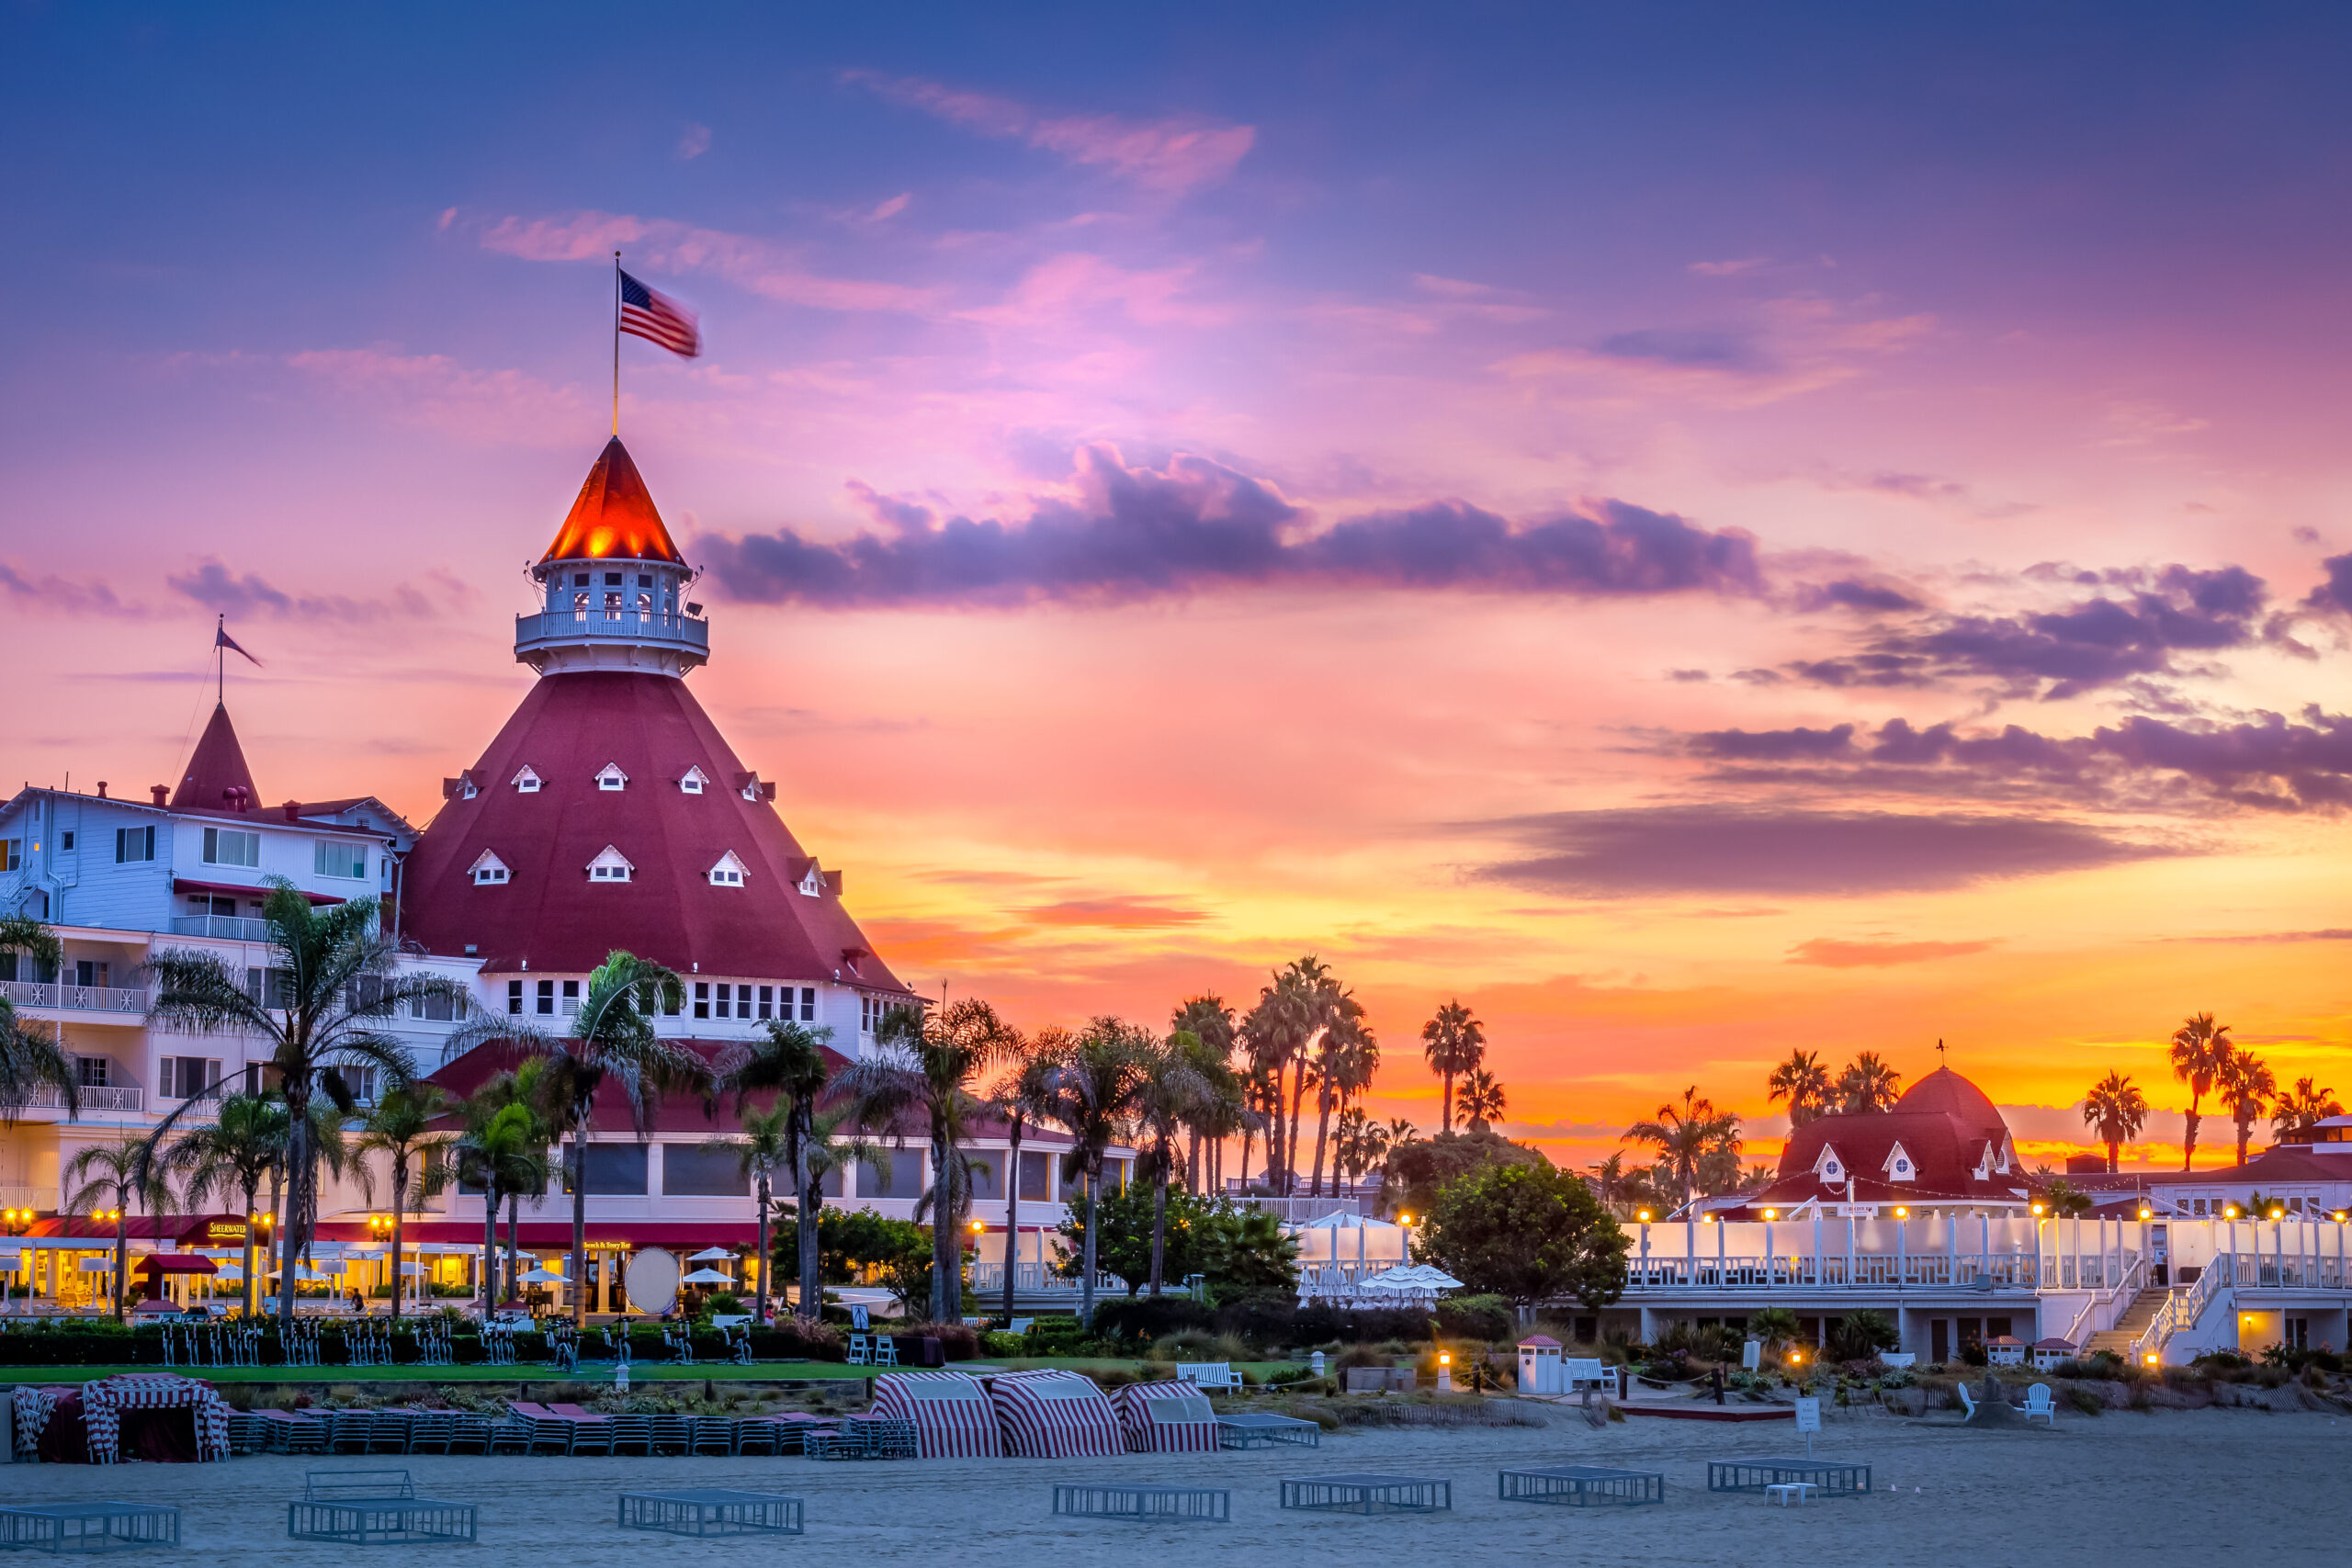 Hotel Coronado with the sun setting in the background.